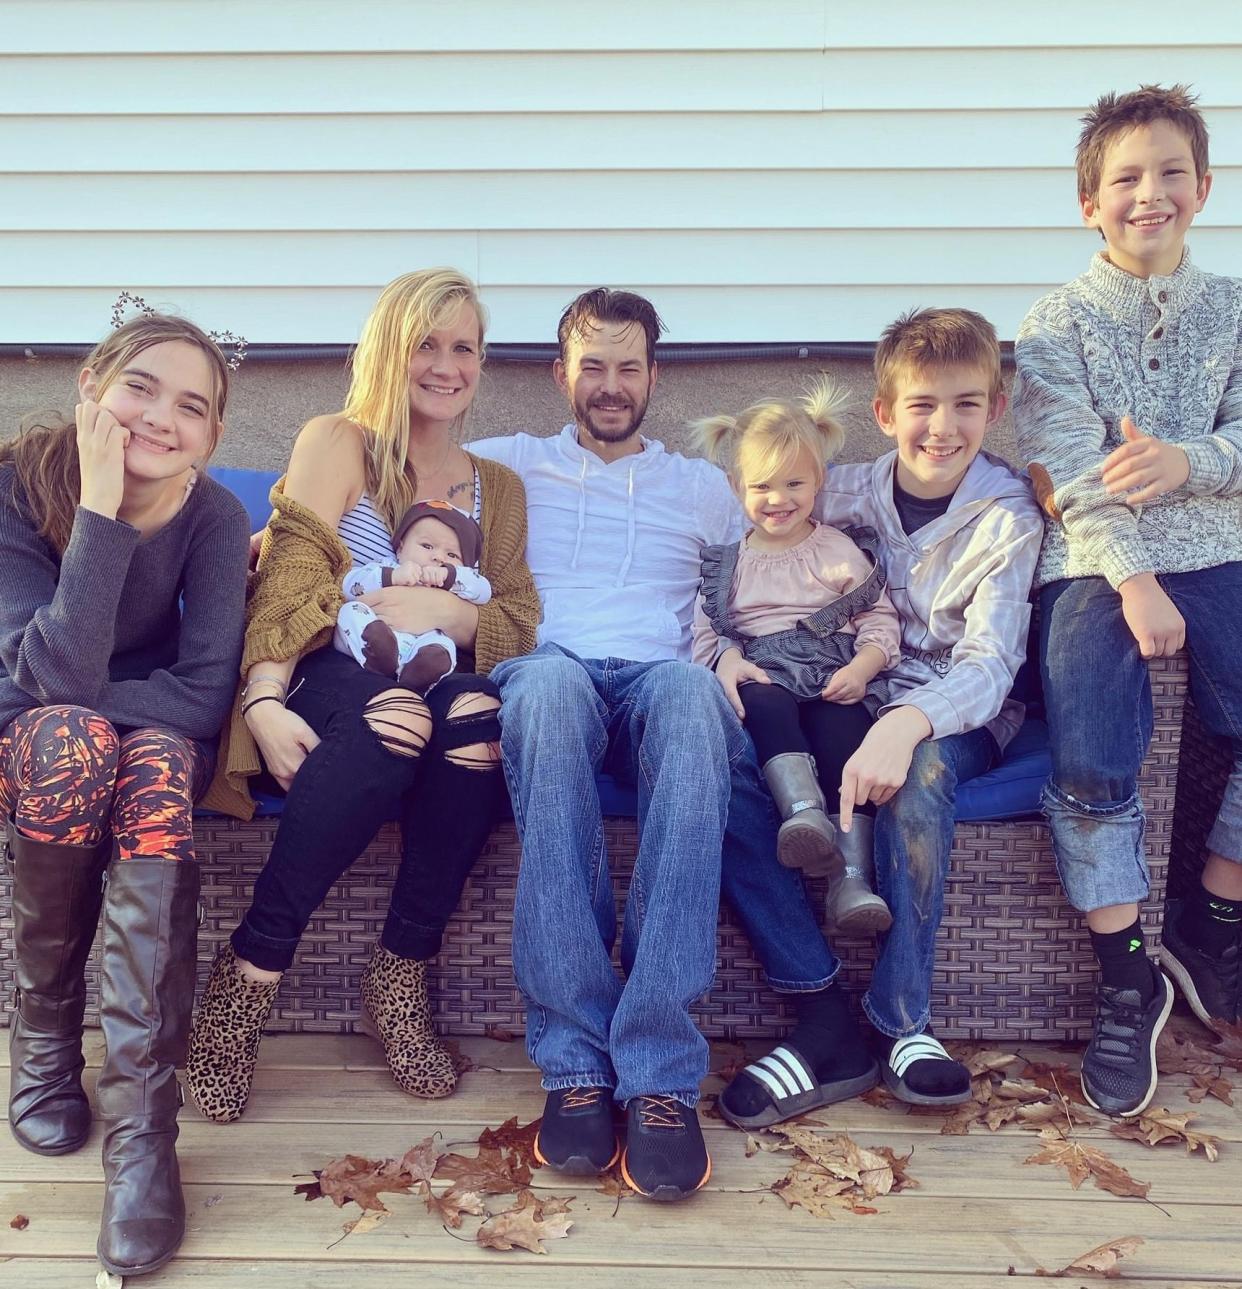 Michelle Mammarella with her husband, Nate, and their children, who range in age from 1 to 13.